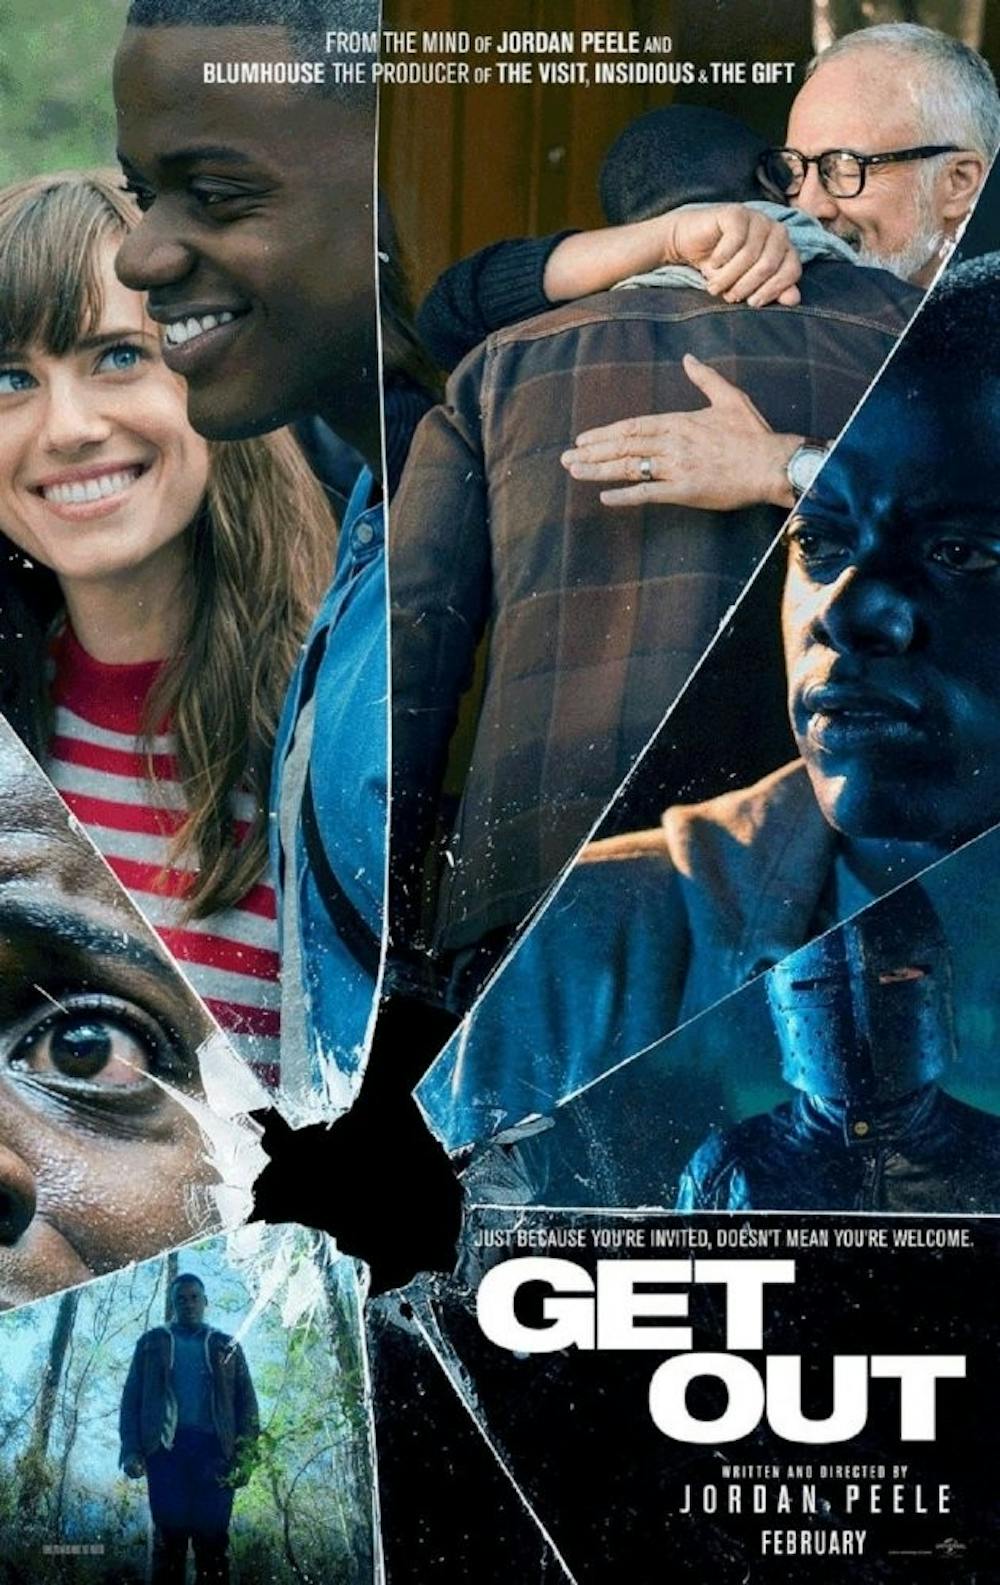 <p>AMC Muncie Showplace 12 will show an advanced screening of Universal Studio’s “Get Out” on Feb. 9 at 7 p.m. The horror-thriller revolves around ominous events that happen when a young black man stays at his white girlfriend’s parents’ estate for the weekend.<em> IMDb // Photo Courtesy</em></p>